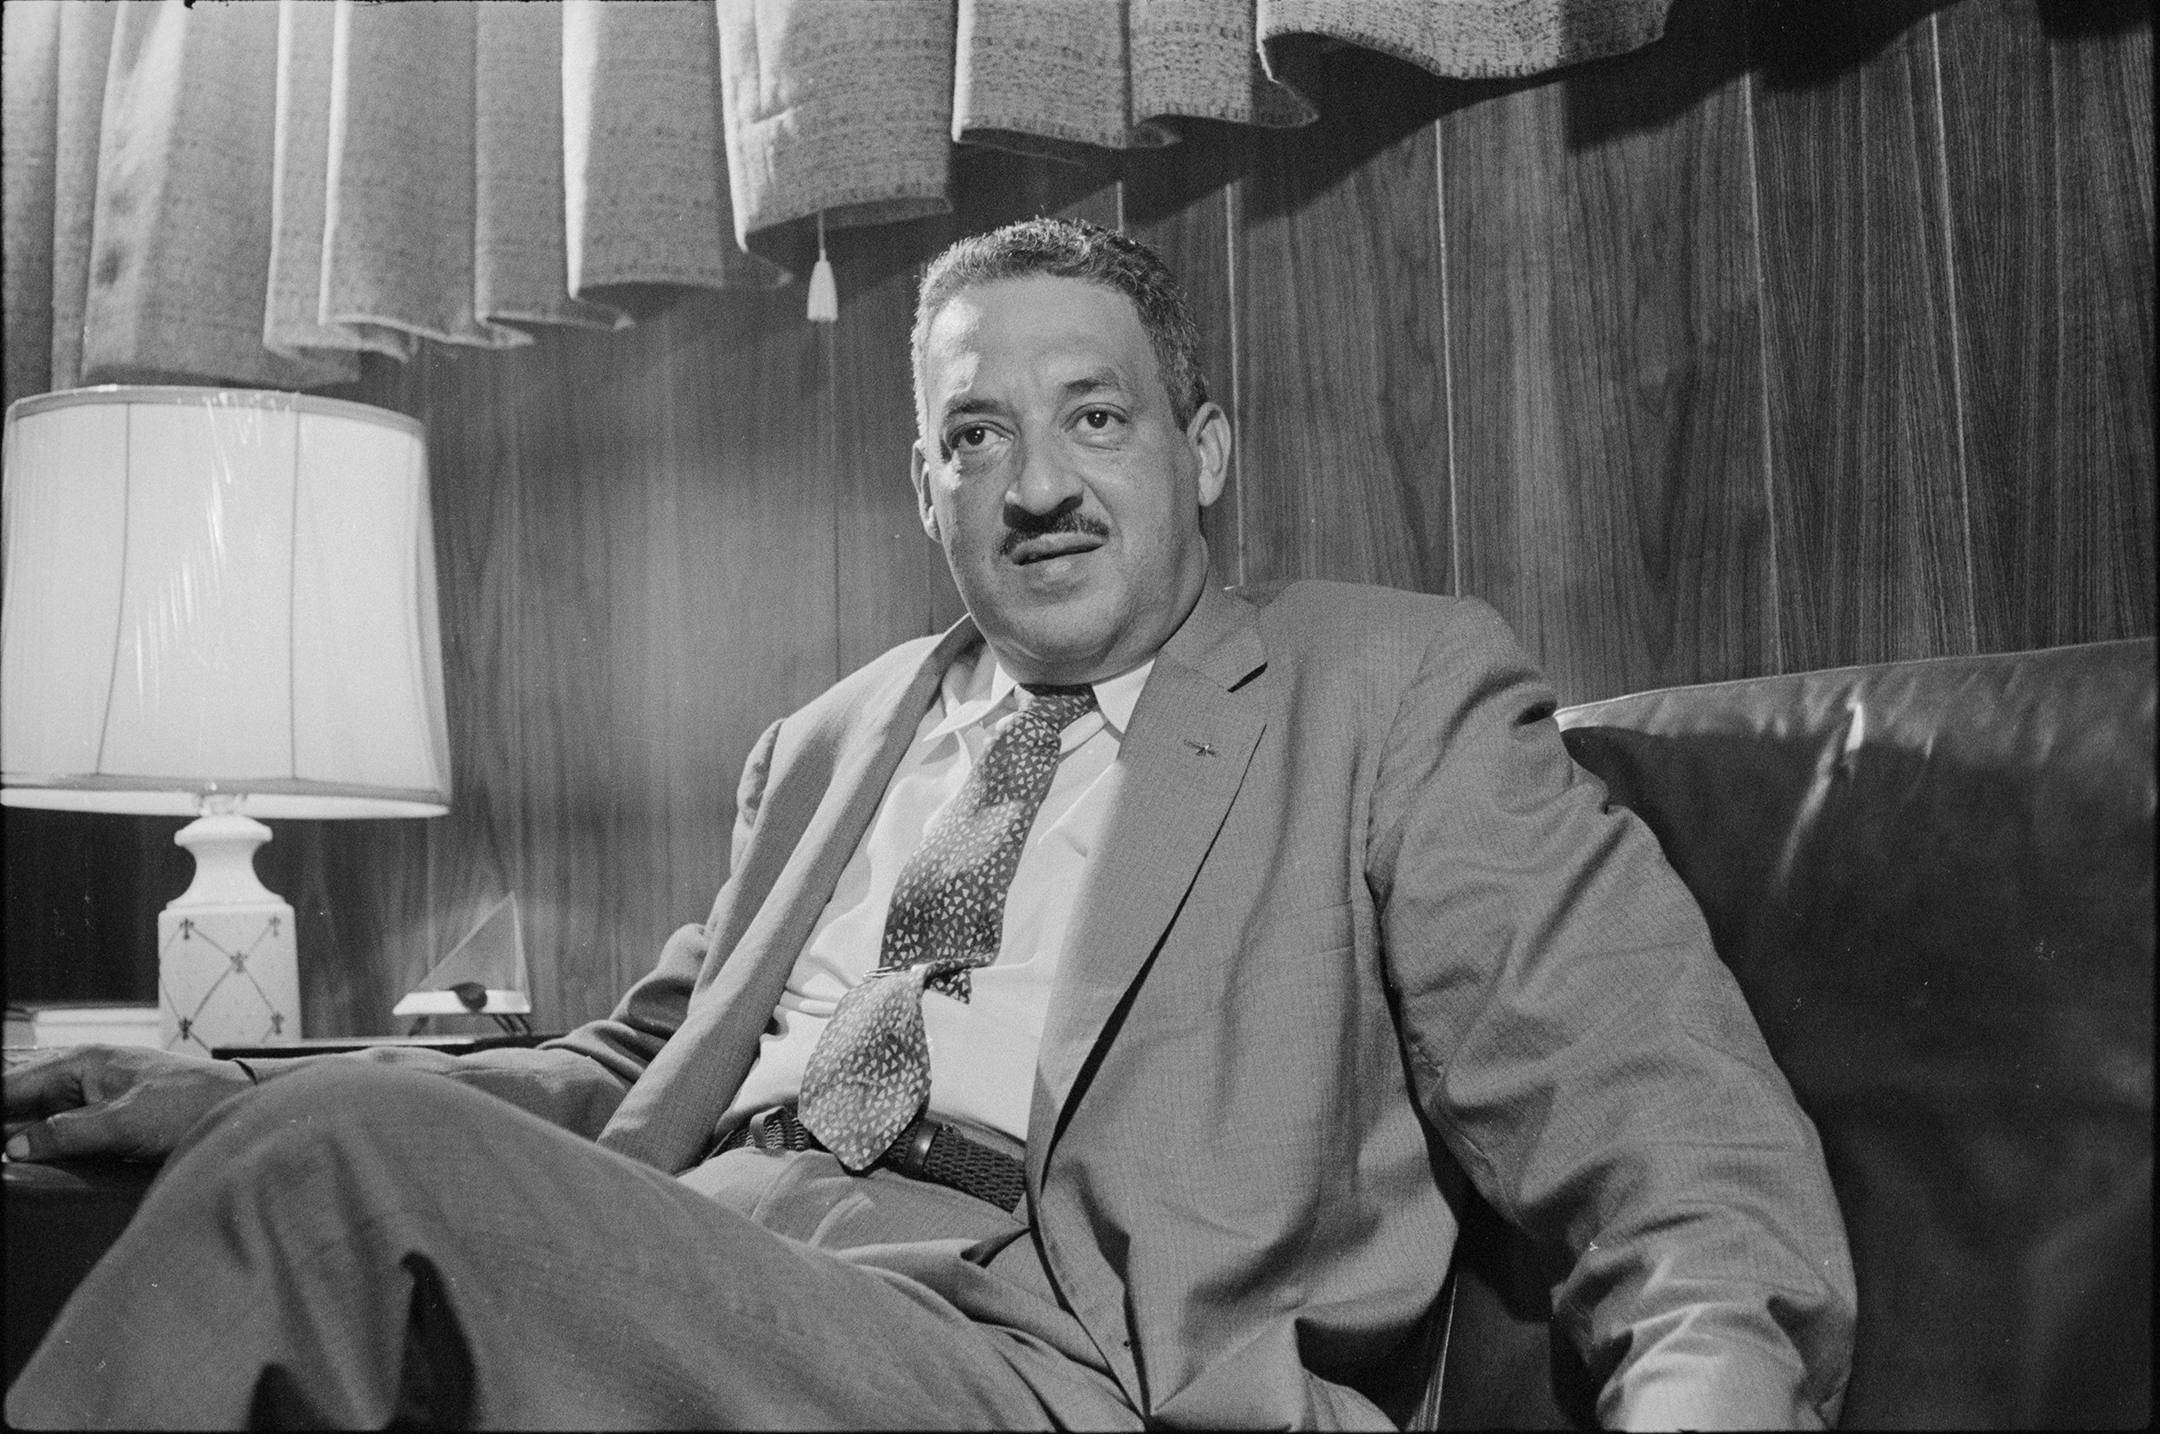 Thurgood Marshall in a suit sits on a leather couch in a wood-paneled room